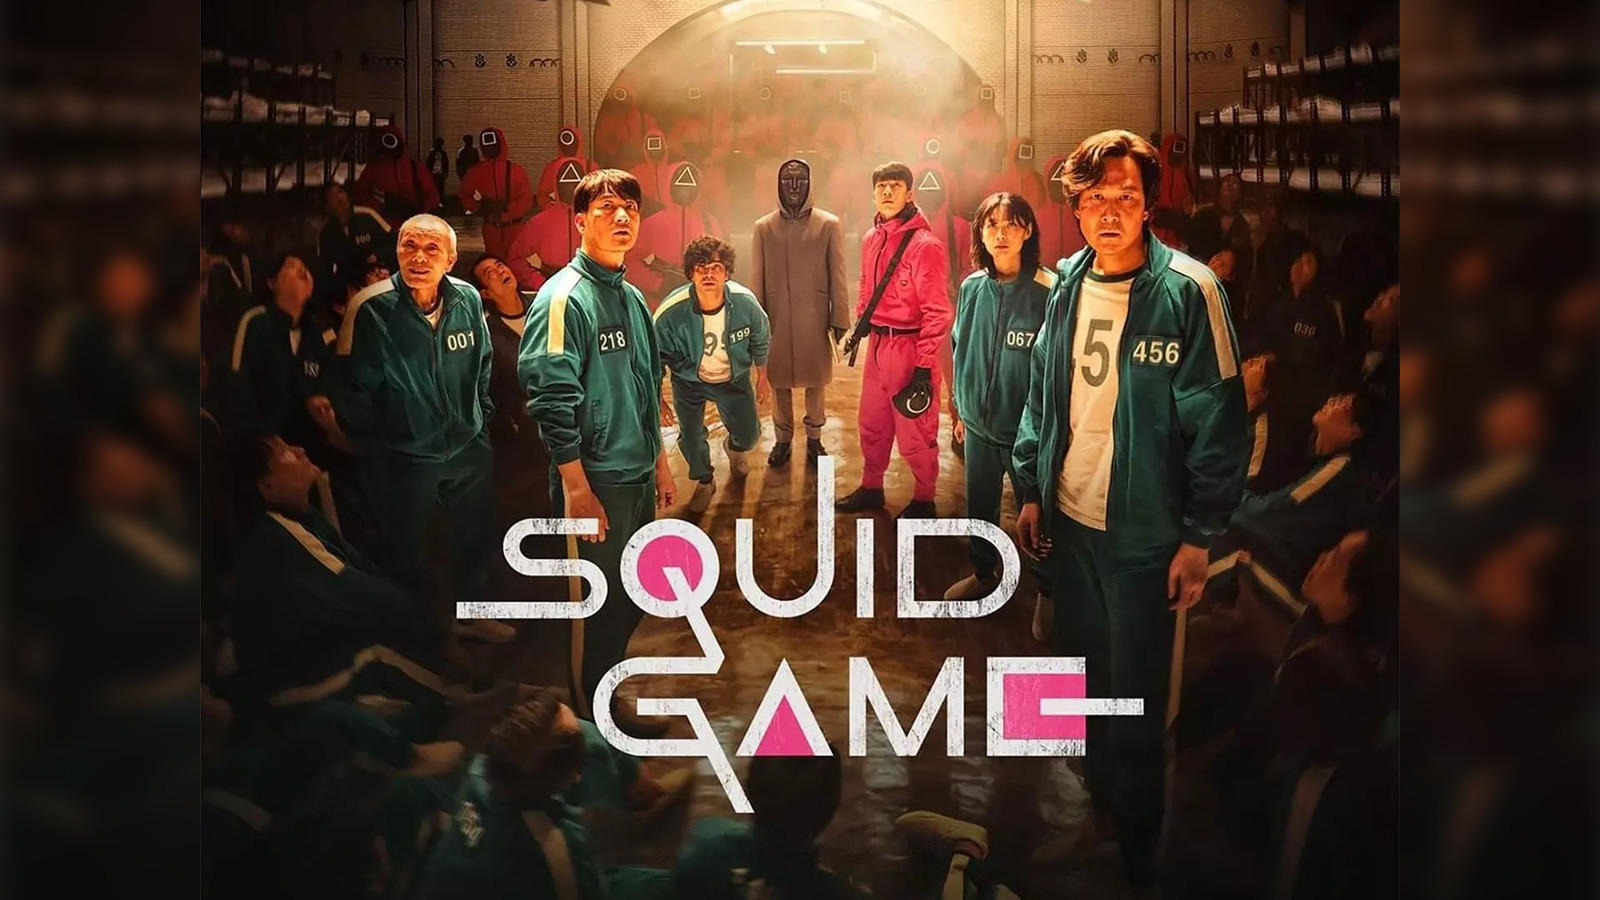 Part of the film set for the highly anticipated 'Squid Game Season 2'  revealed to the press